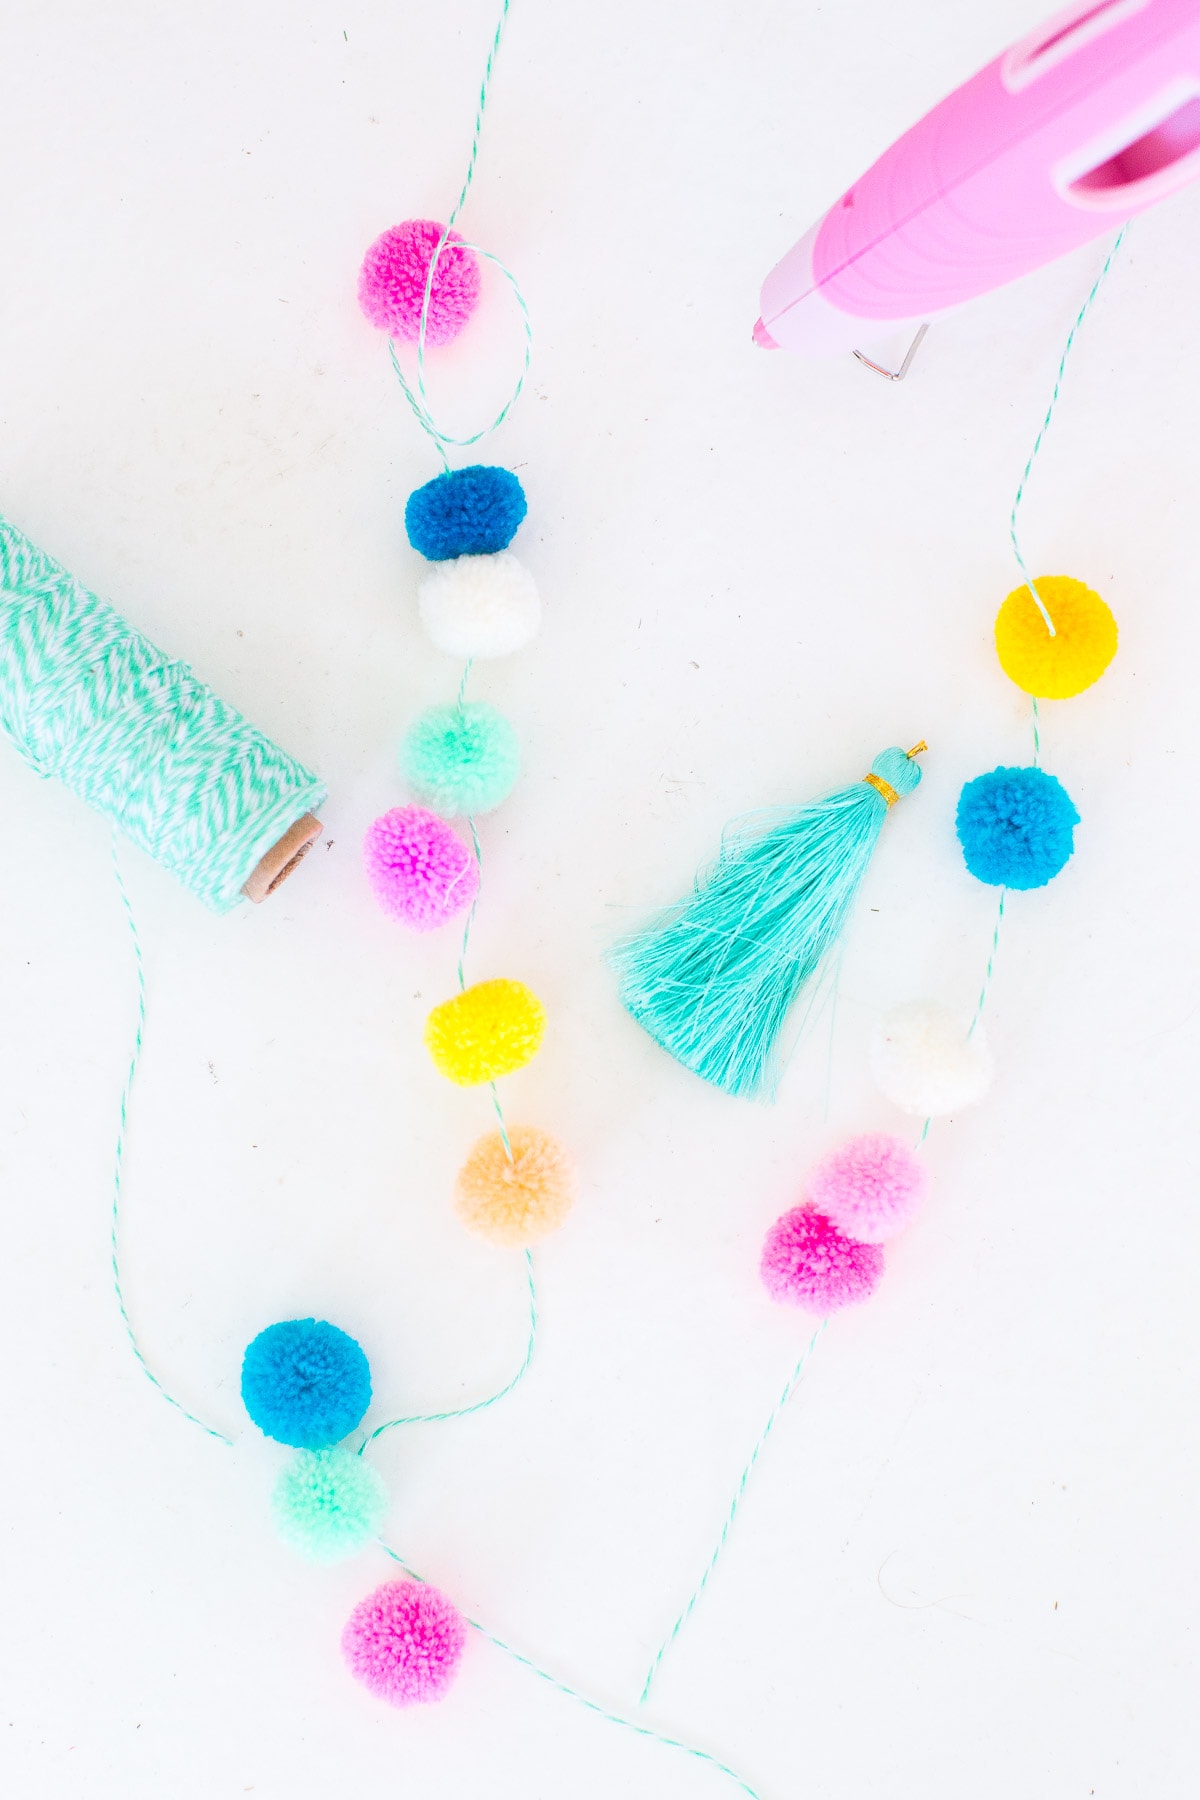 Make a statement this Summer with our DIY pom pom tassel circle pool bag! - sugar and cloth - houston blogger